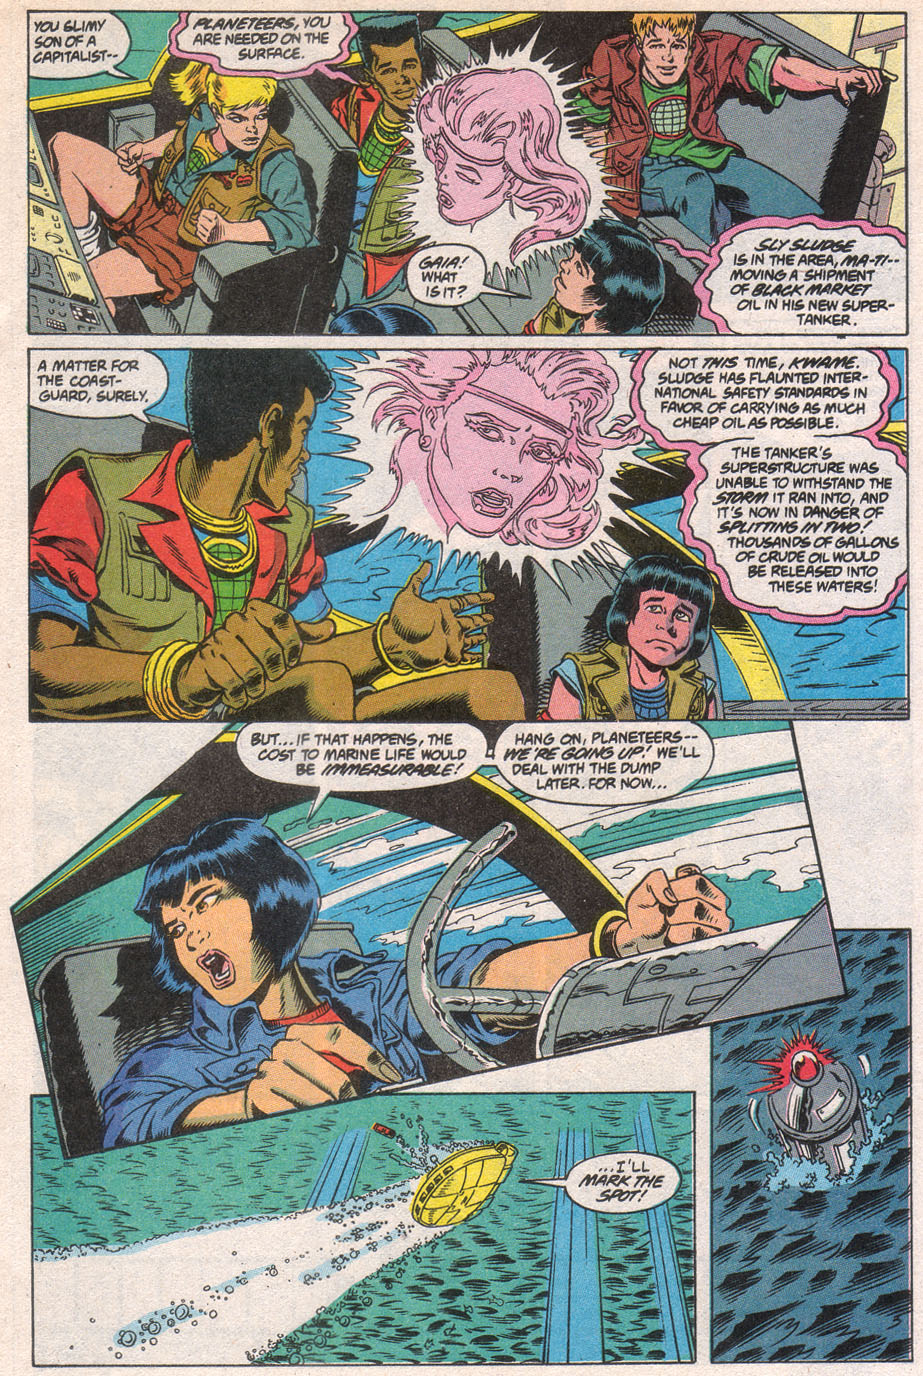 Captain Planet and the Planeteers 9 Page 4